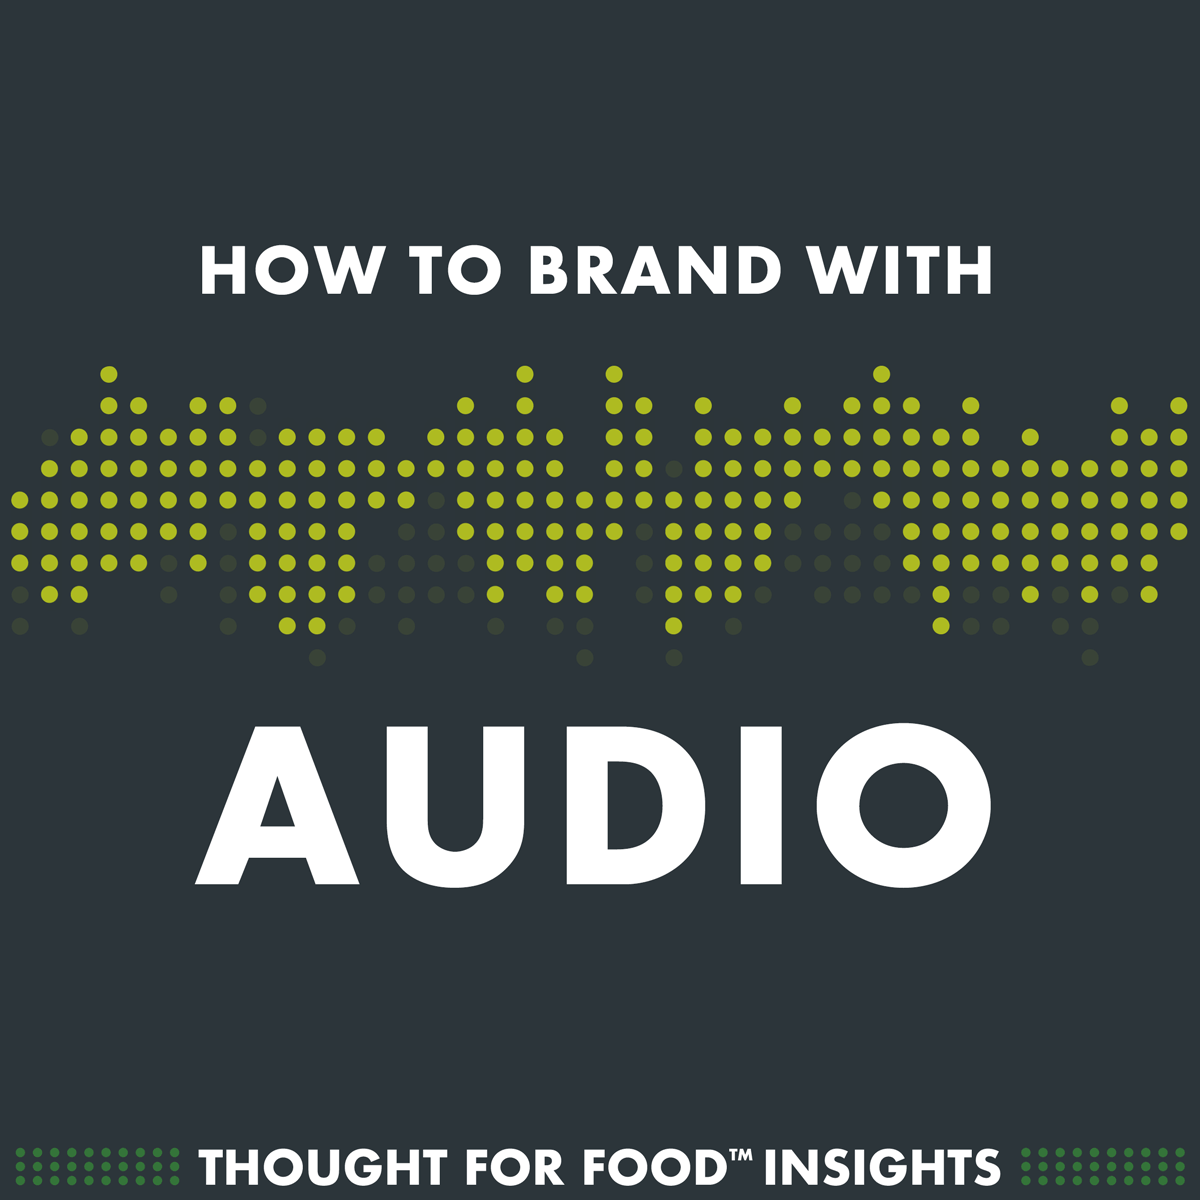 How to brand with audio